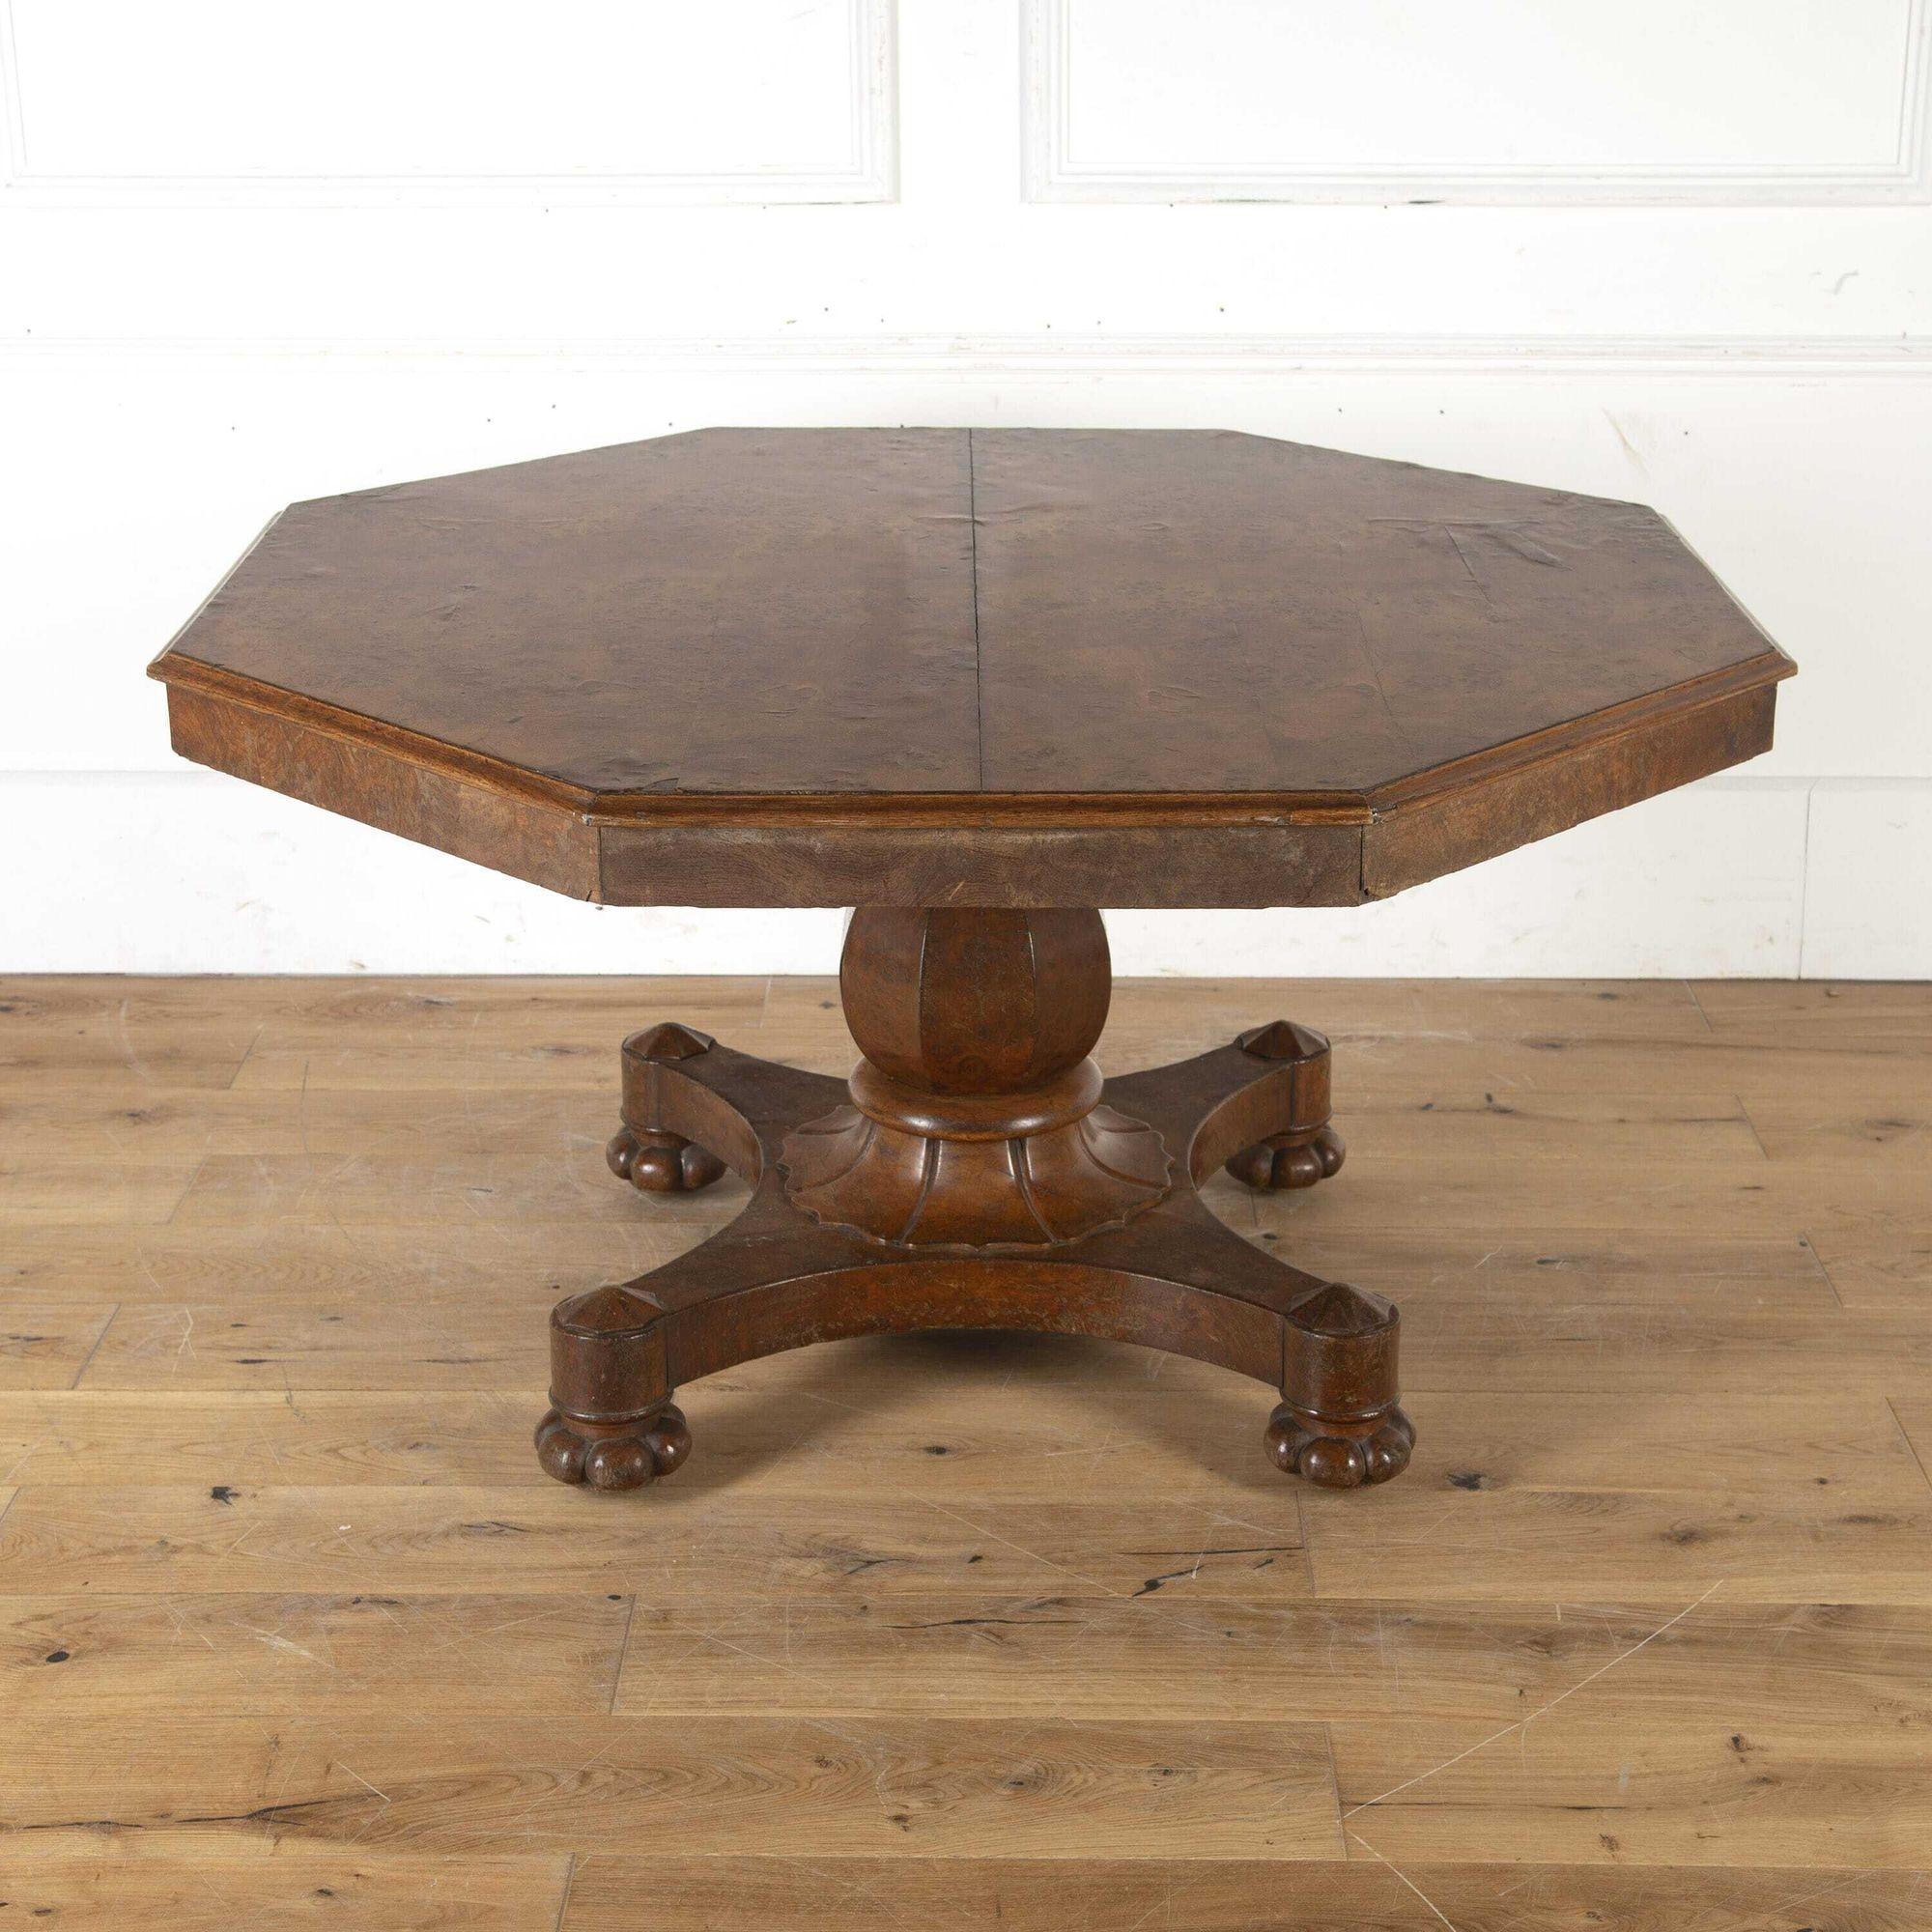 English 19th Century burr walnut centre table. 
The beautifully figured octagonal top is supported on a balustered central support column with a gadrooned base. 
Resting on a shaped quadriform base with four carved bun feet. 
This is a classic